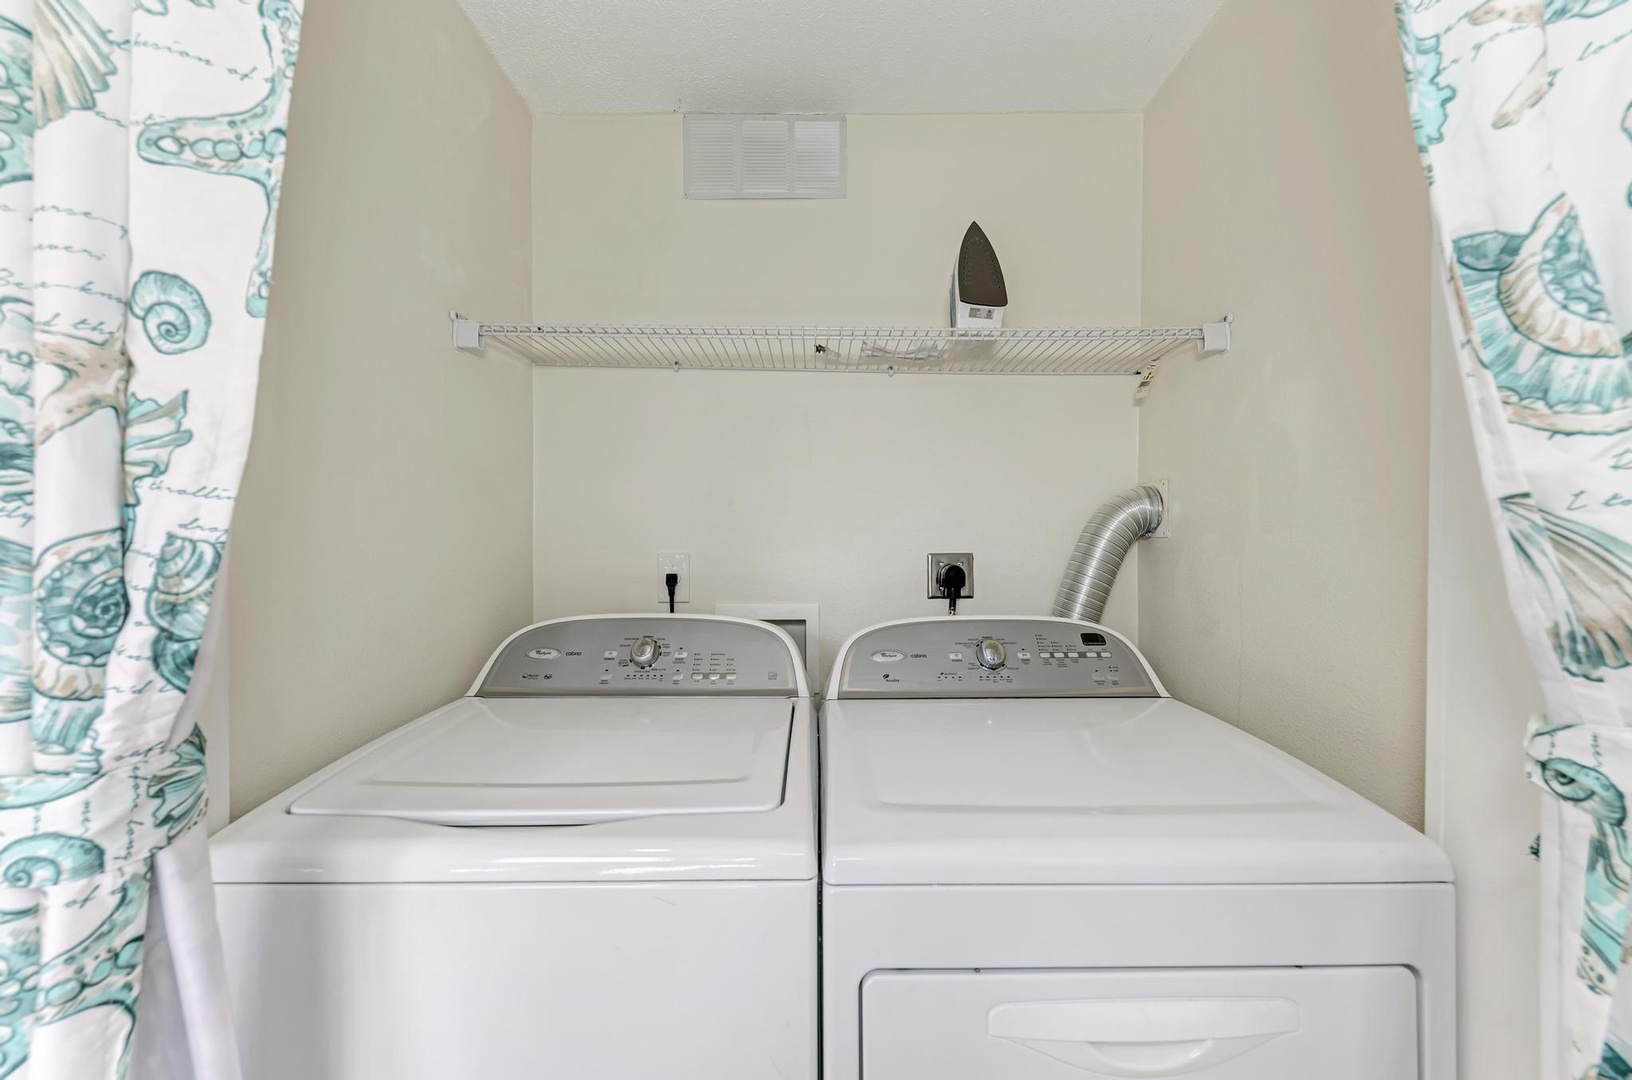 Washer/Dryer Onsite